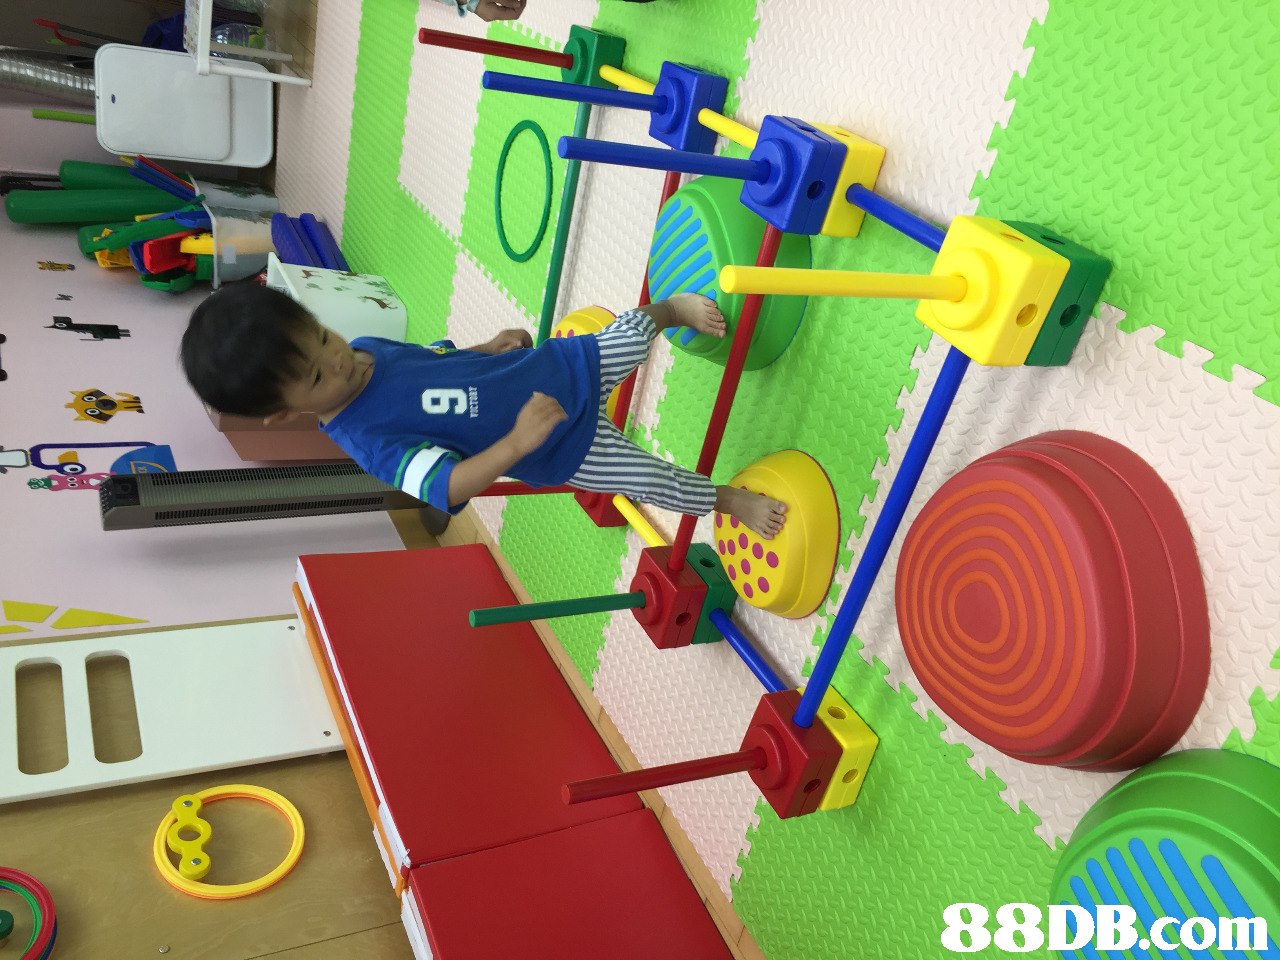   toy,play,product,lego,toy block